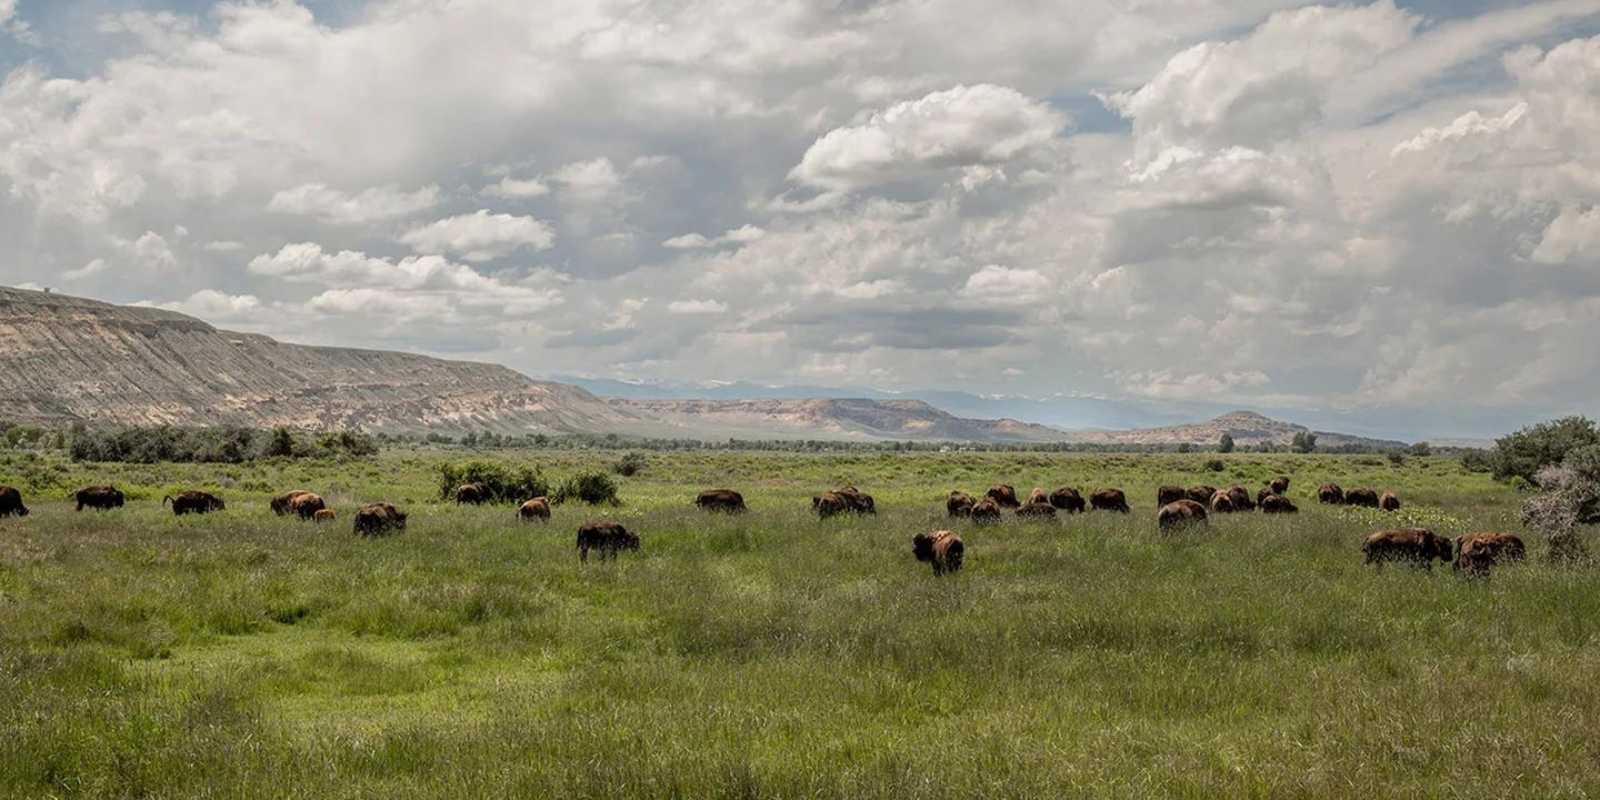 The Eastern Shoshone buffalo herd grazes on the Wind River Indian Reservation in central Wyoming. Photo credit: Ryan Dorgan